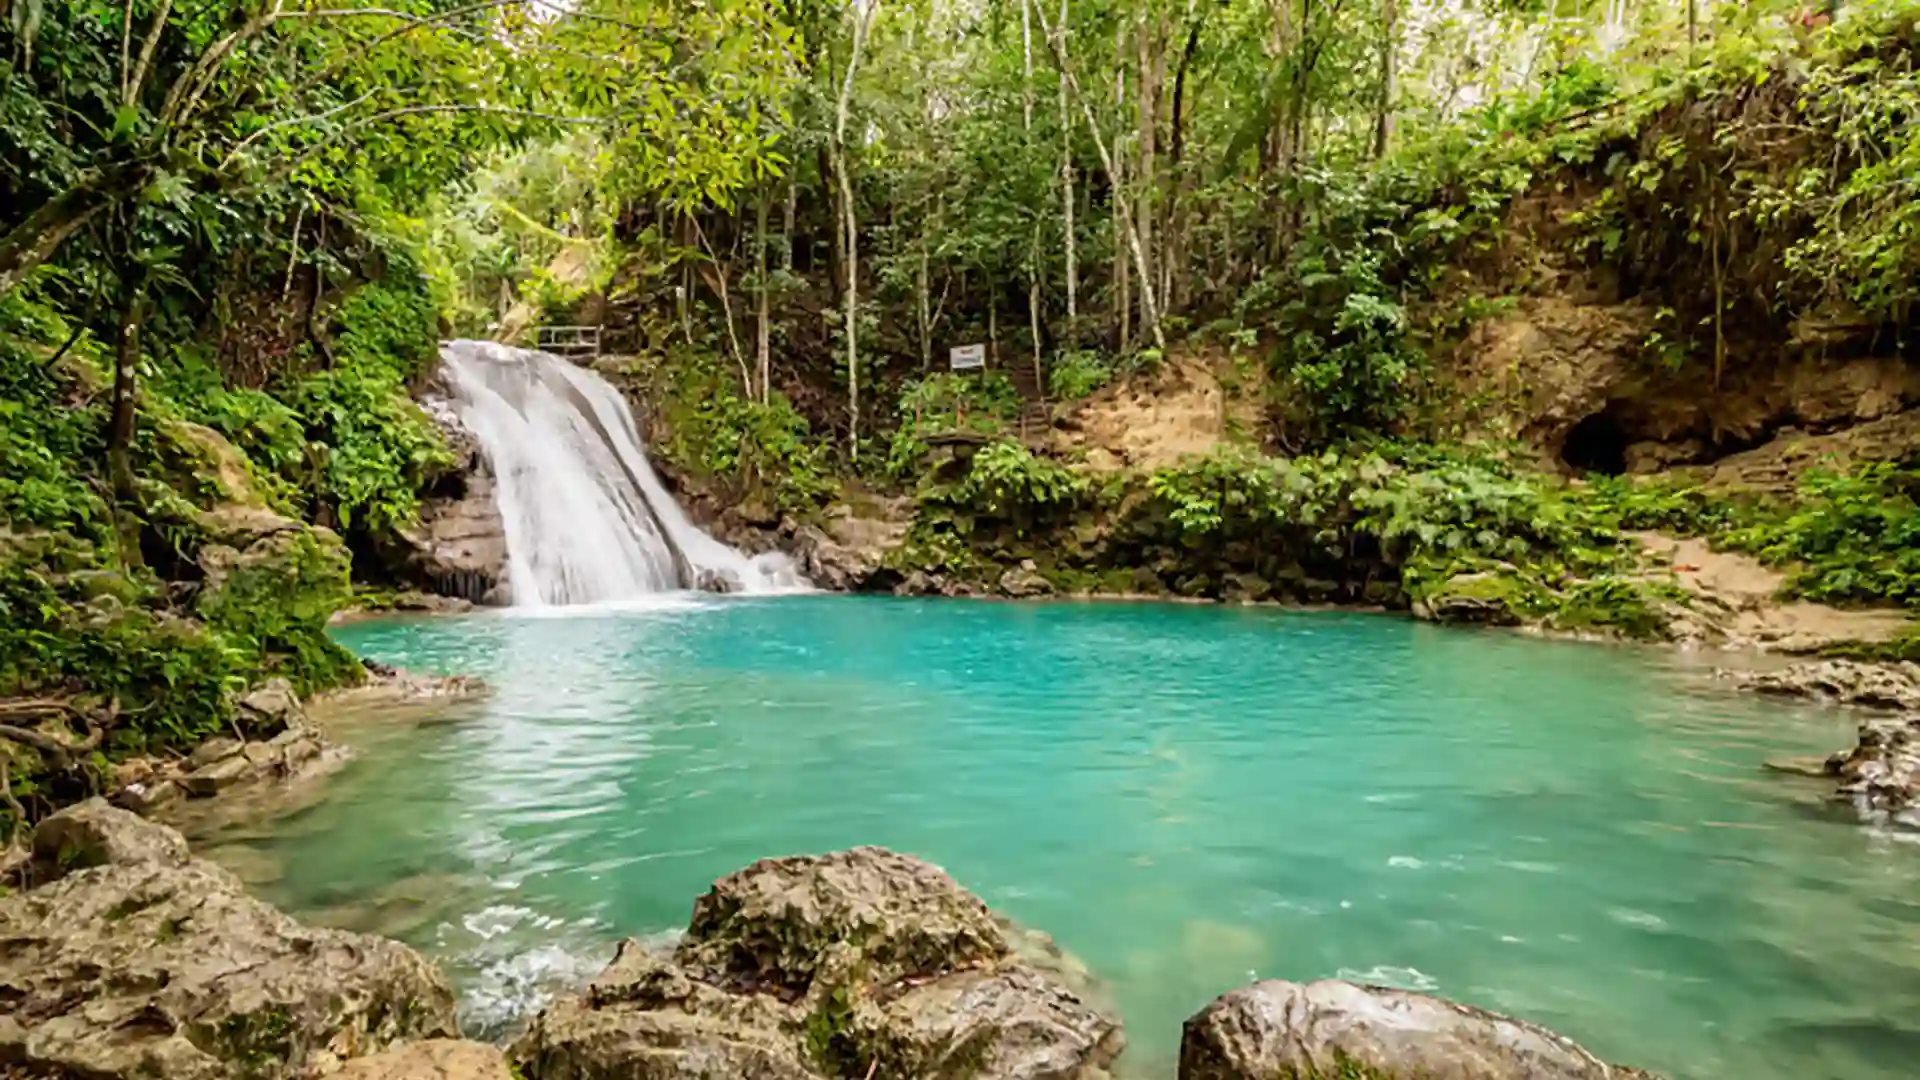 View of waterfall in Ocho Rios, Jamaica, surrounded by lush forest.